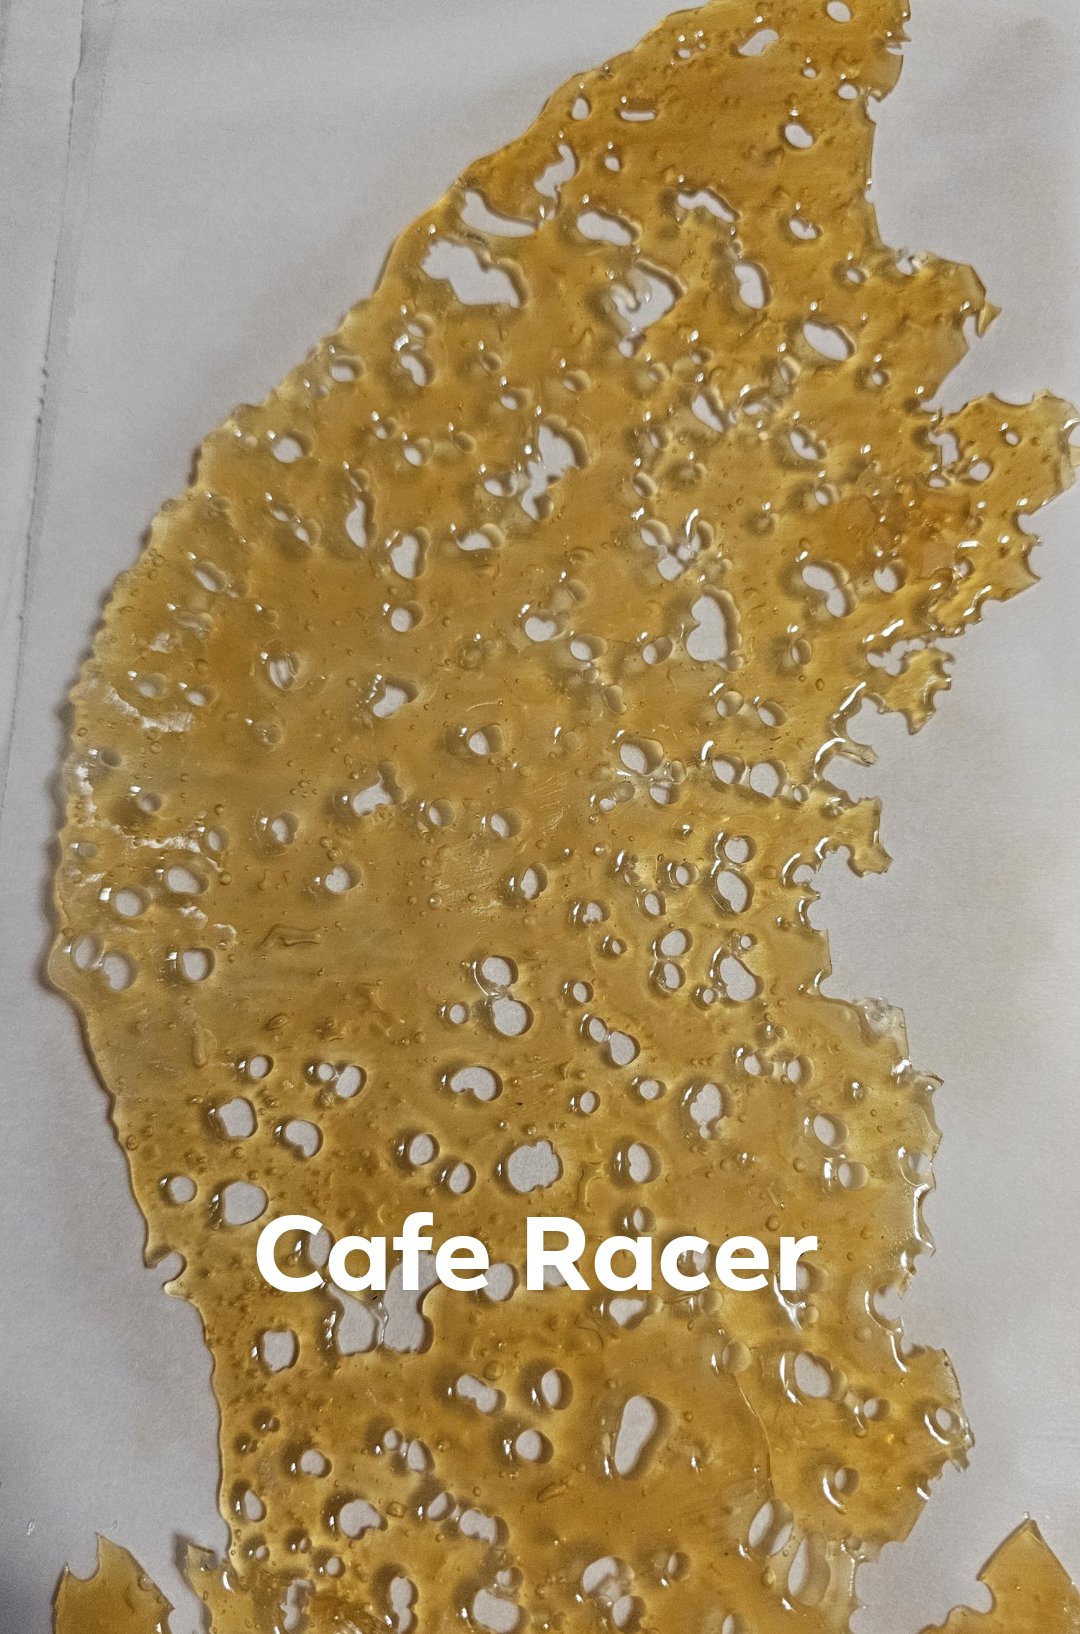 Shatter Mix and Match (28g/1oz)